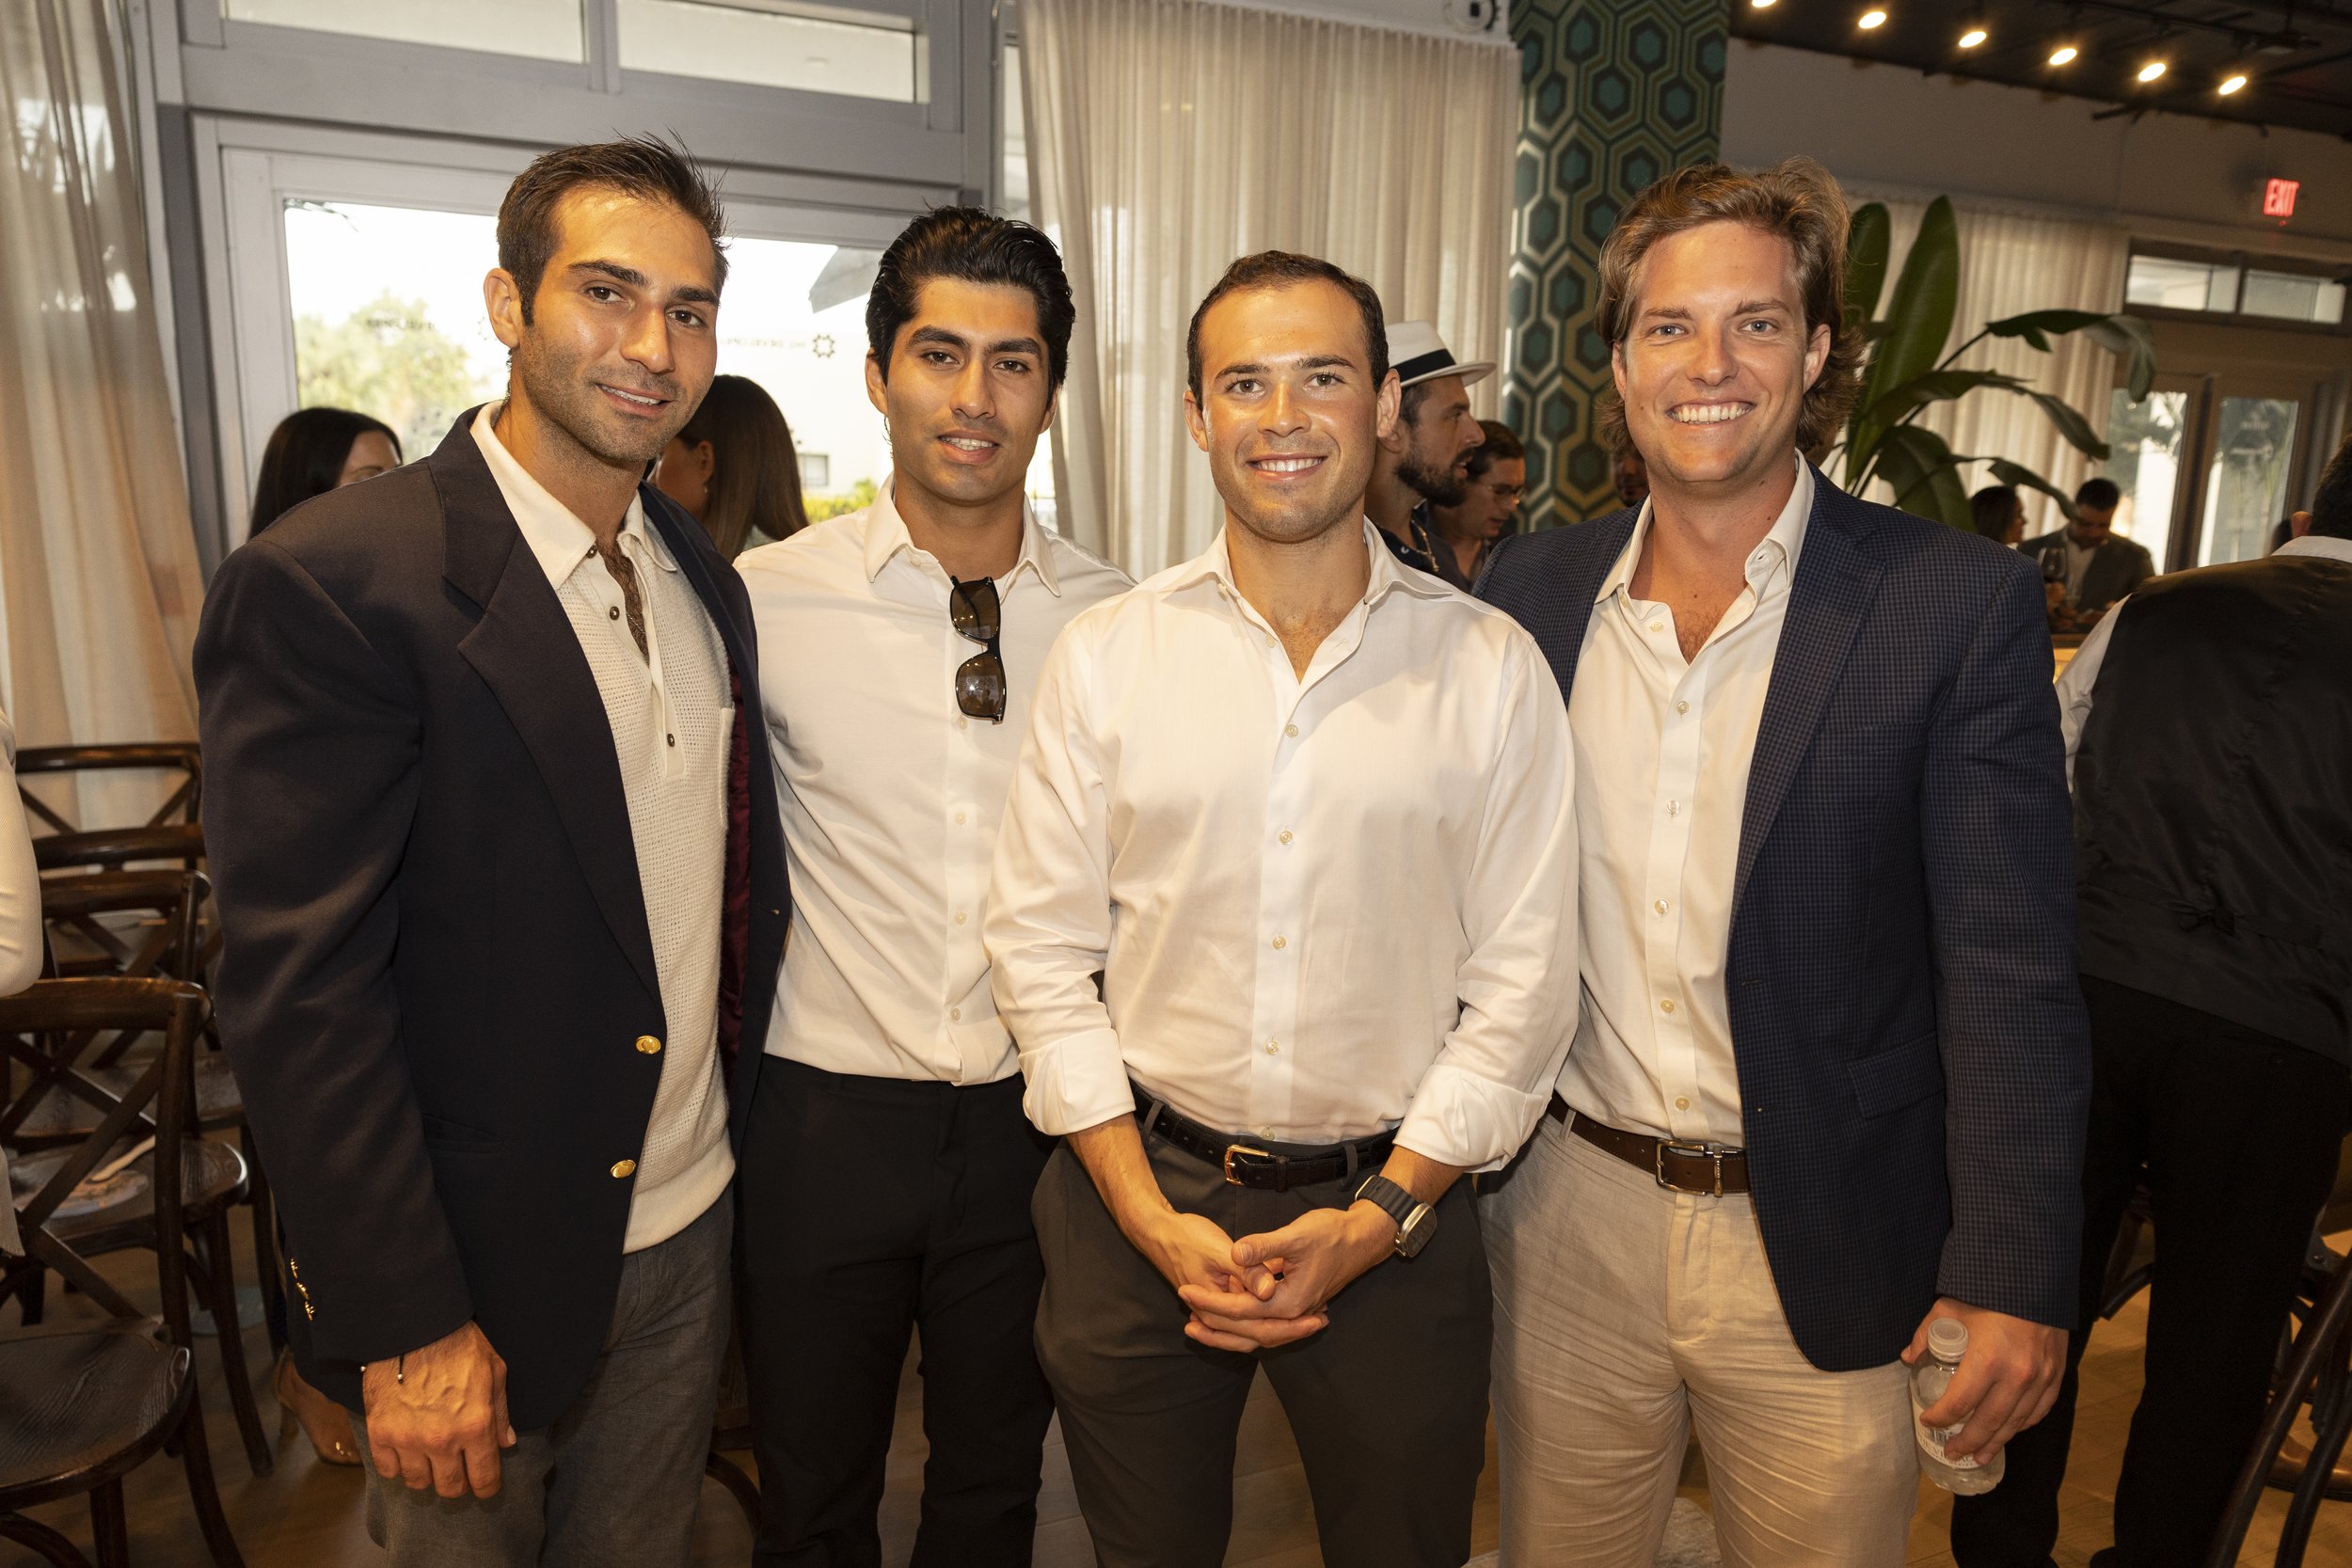 Inside 'An Exploration Into Capital Markets Coral Gables' Presented By PROFILEmiami & MG Developer257.JPG